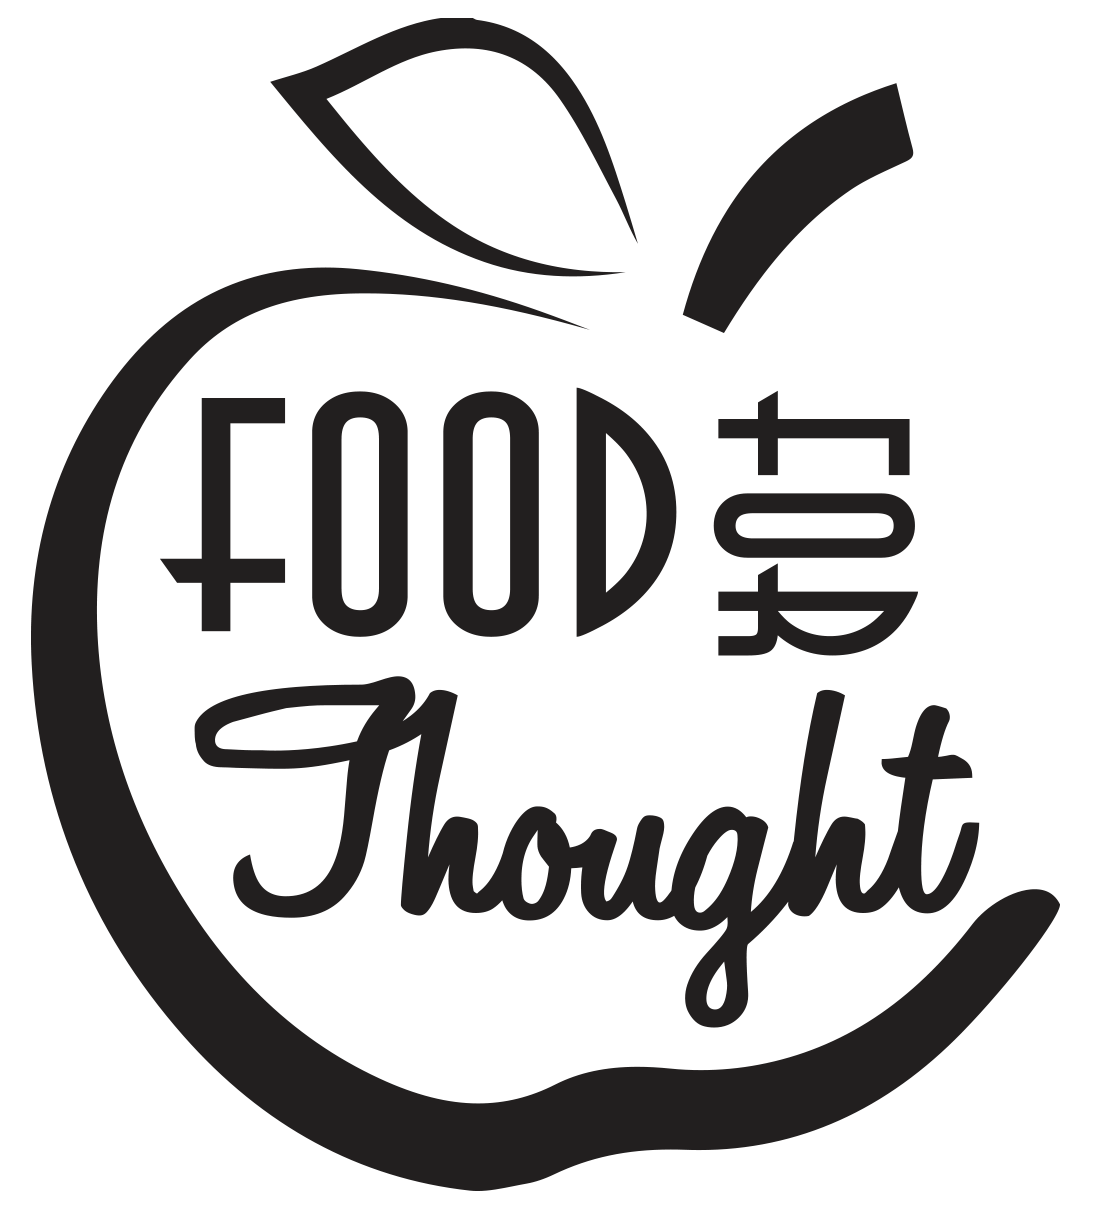 thoughts clipart food for thought